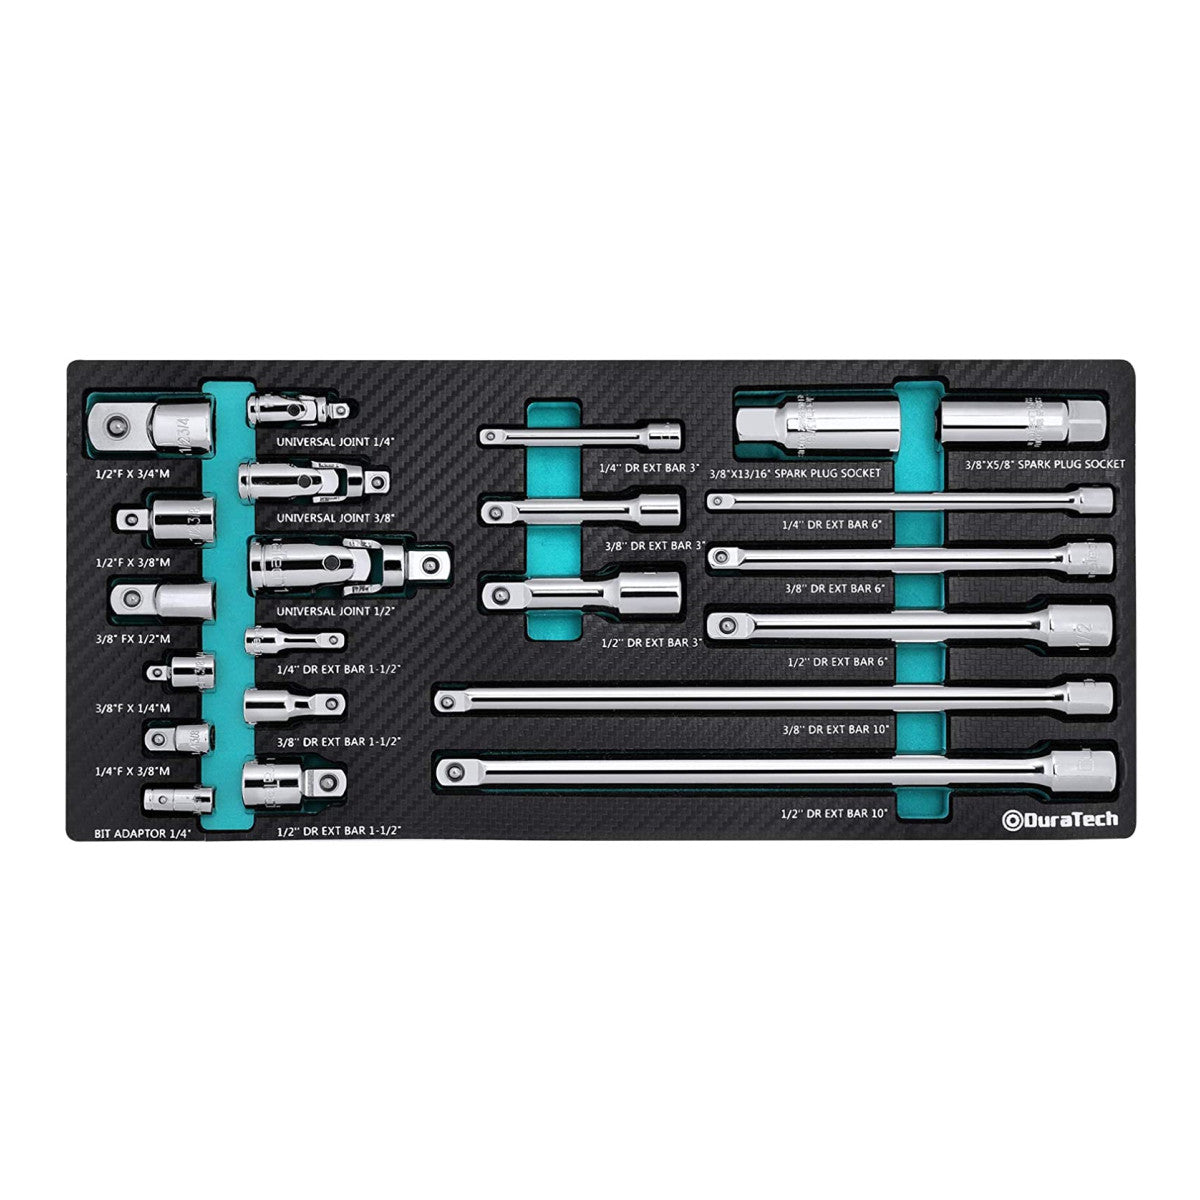 DURATECH 22-Piece Drive Tool Accessory Set